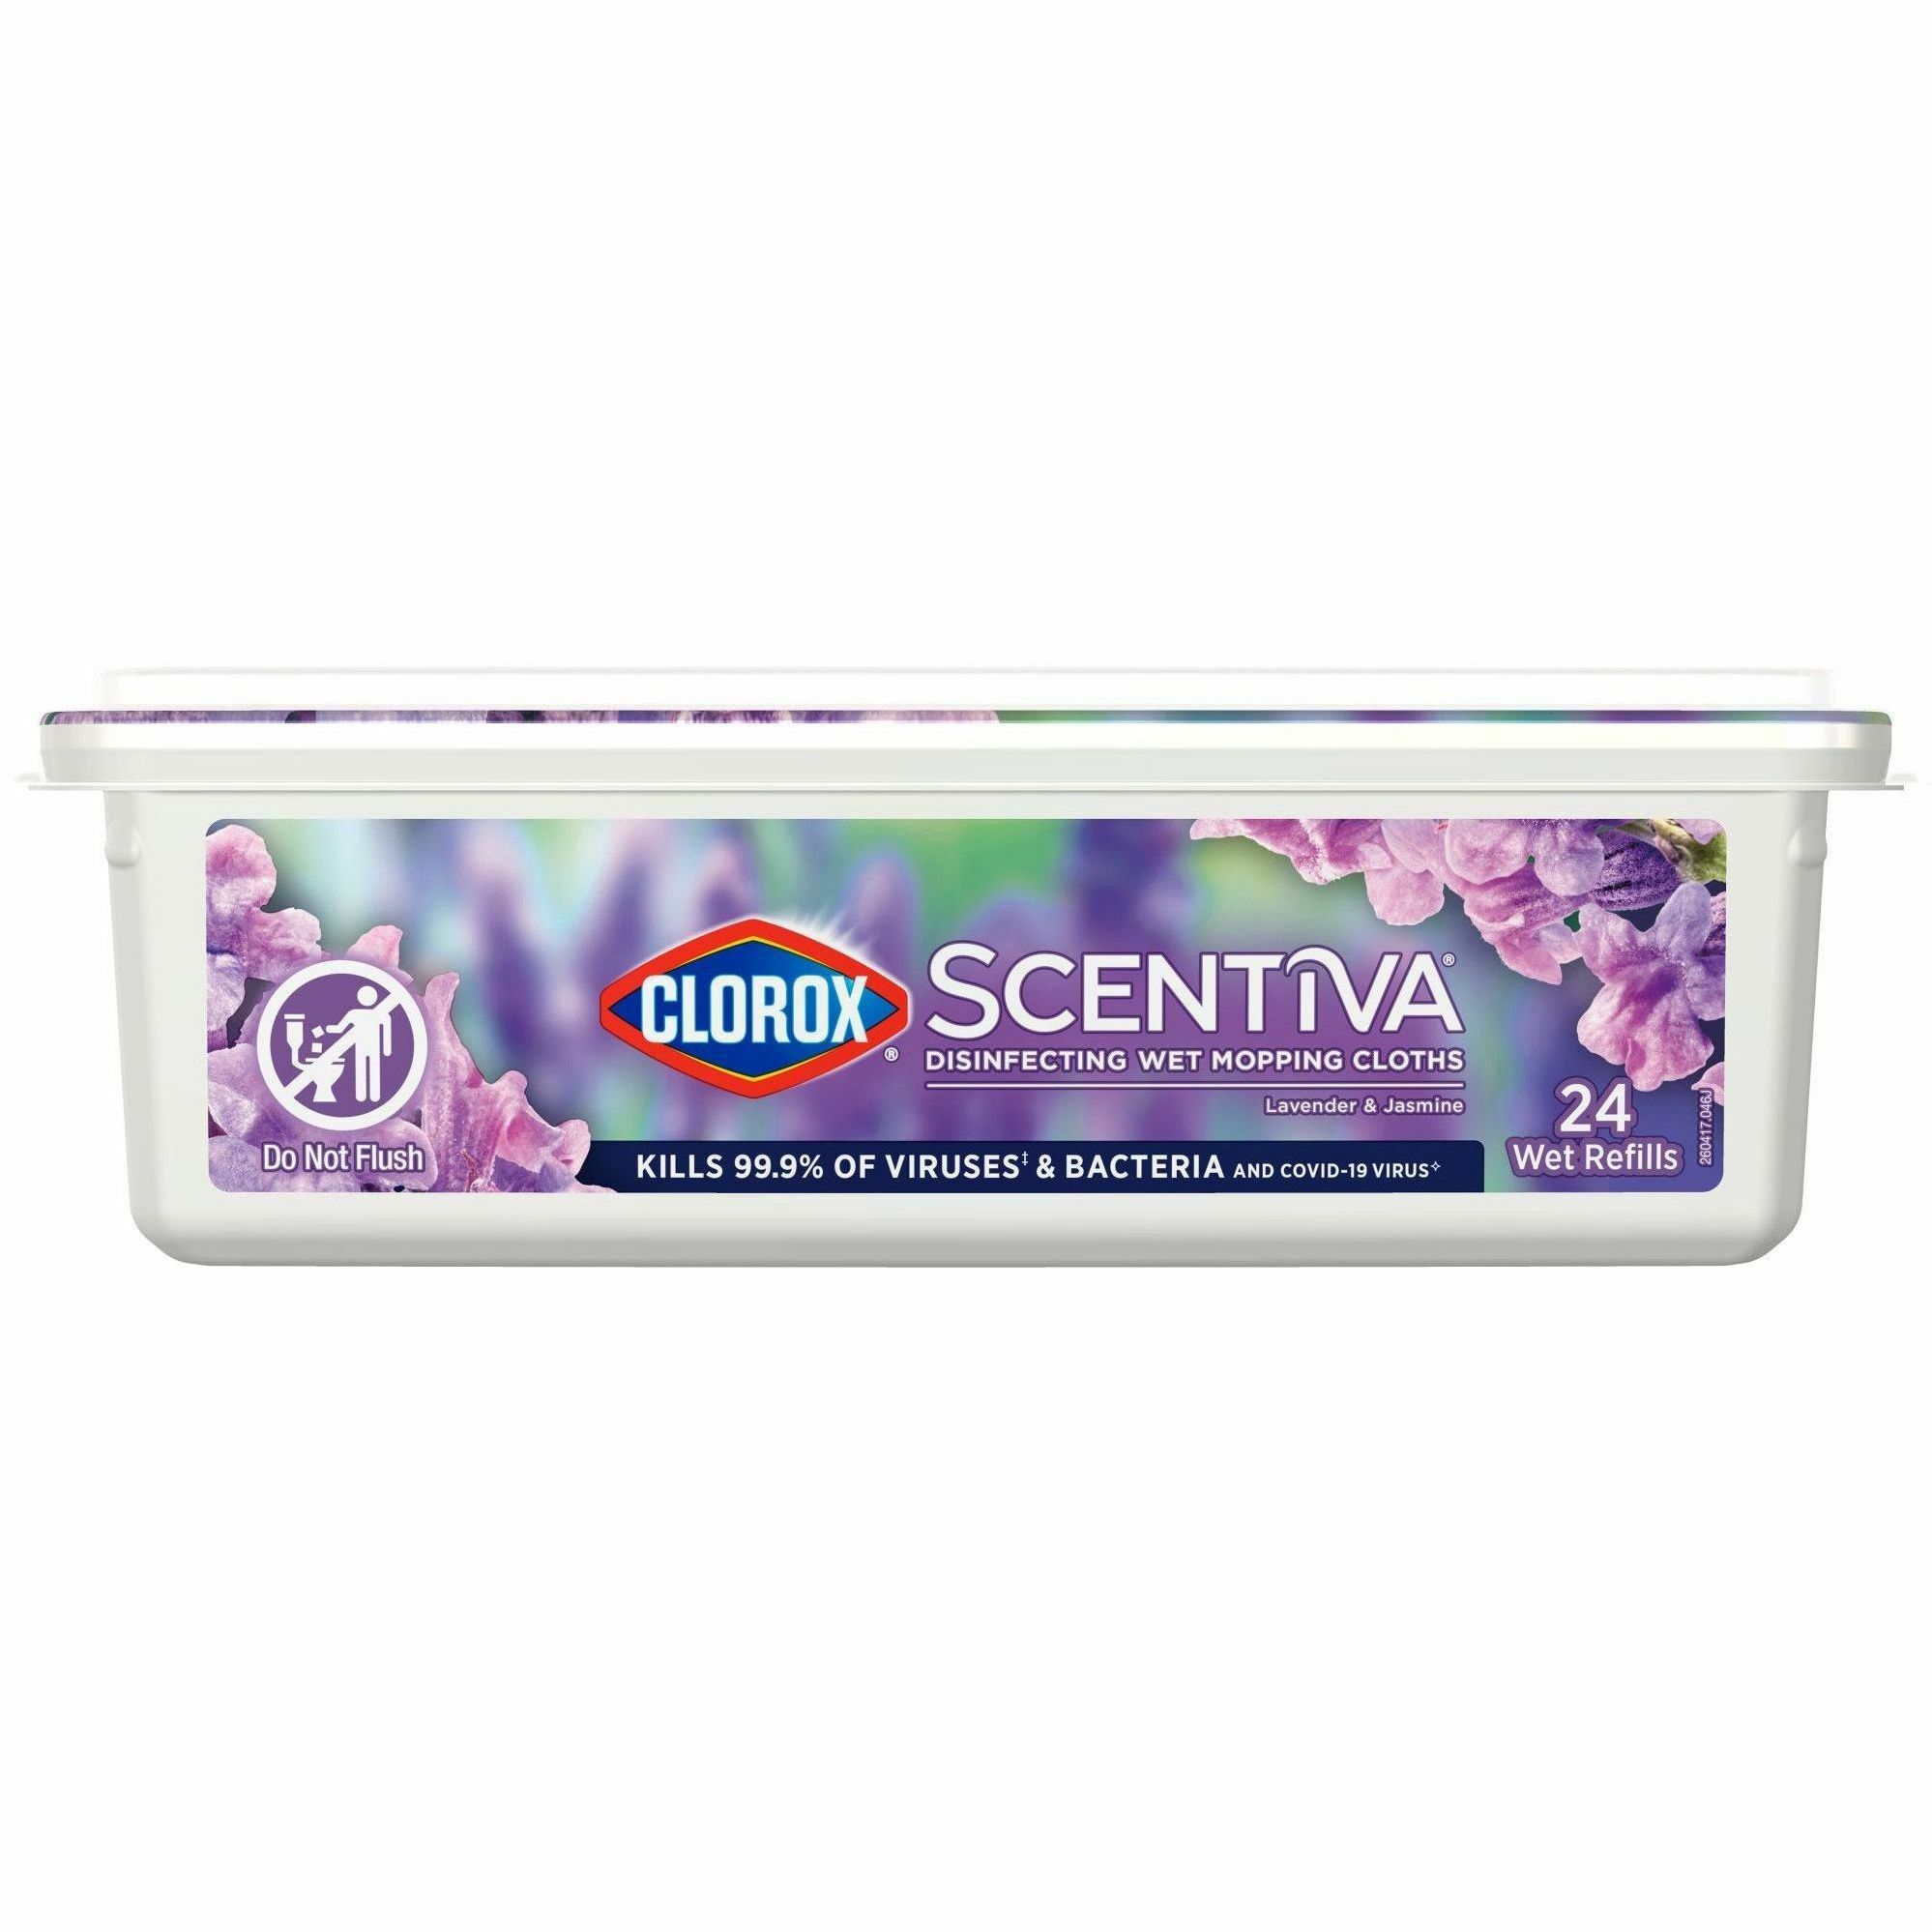 Clorox Scentiva Disinfecting Wet Mopping Cloths 24 Per Pack